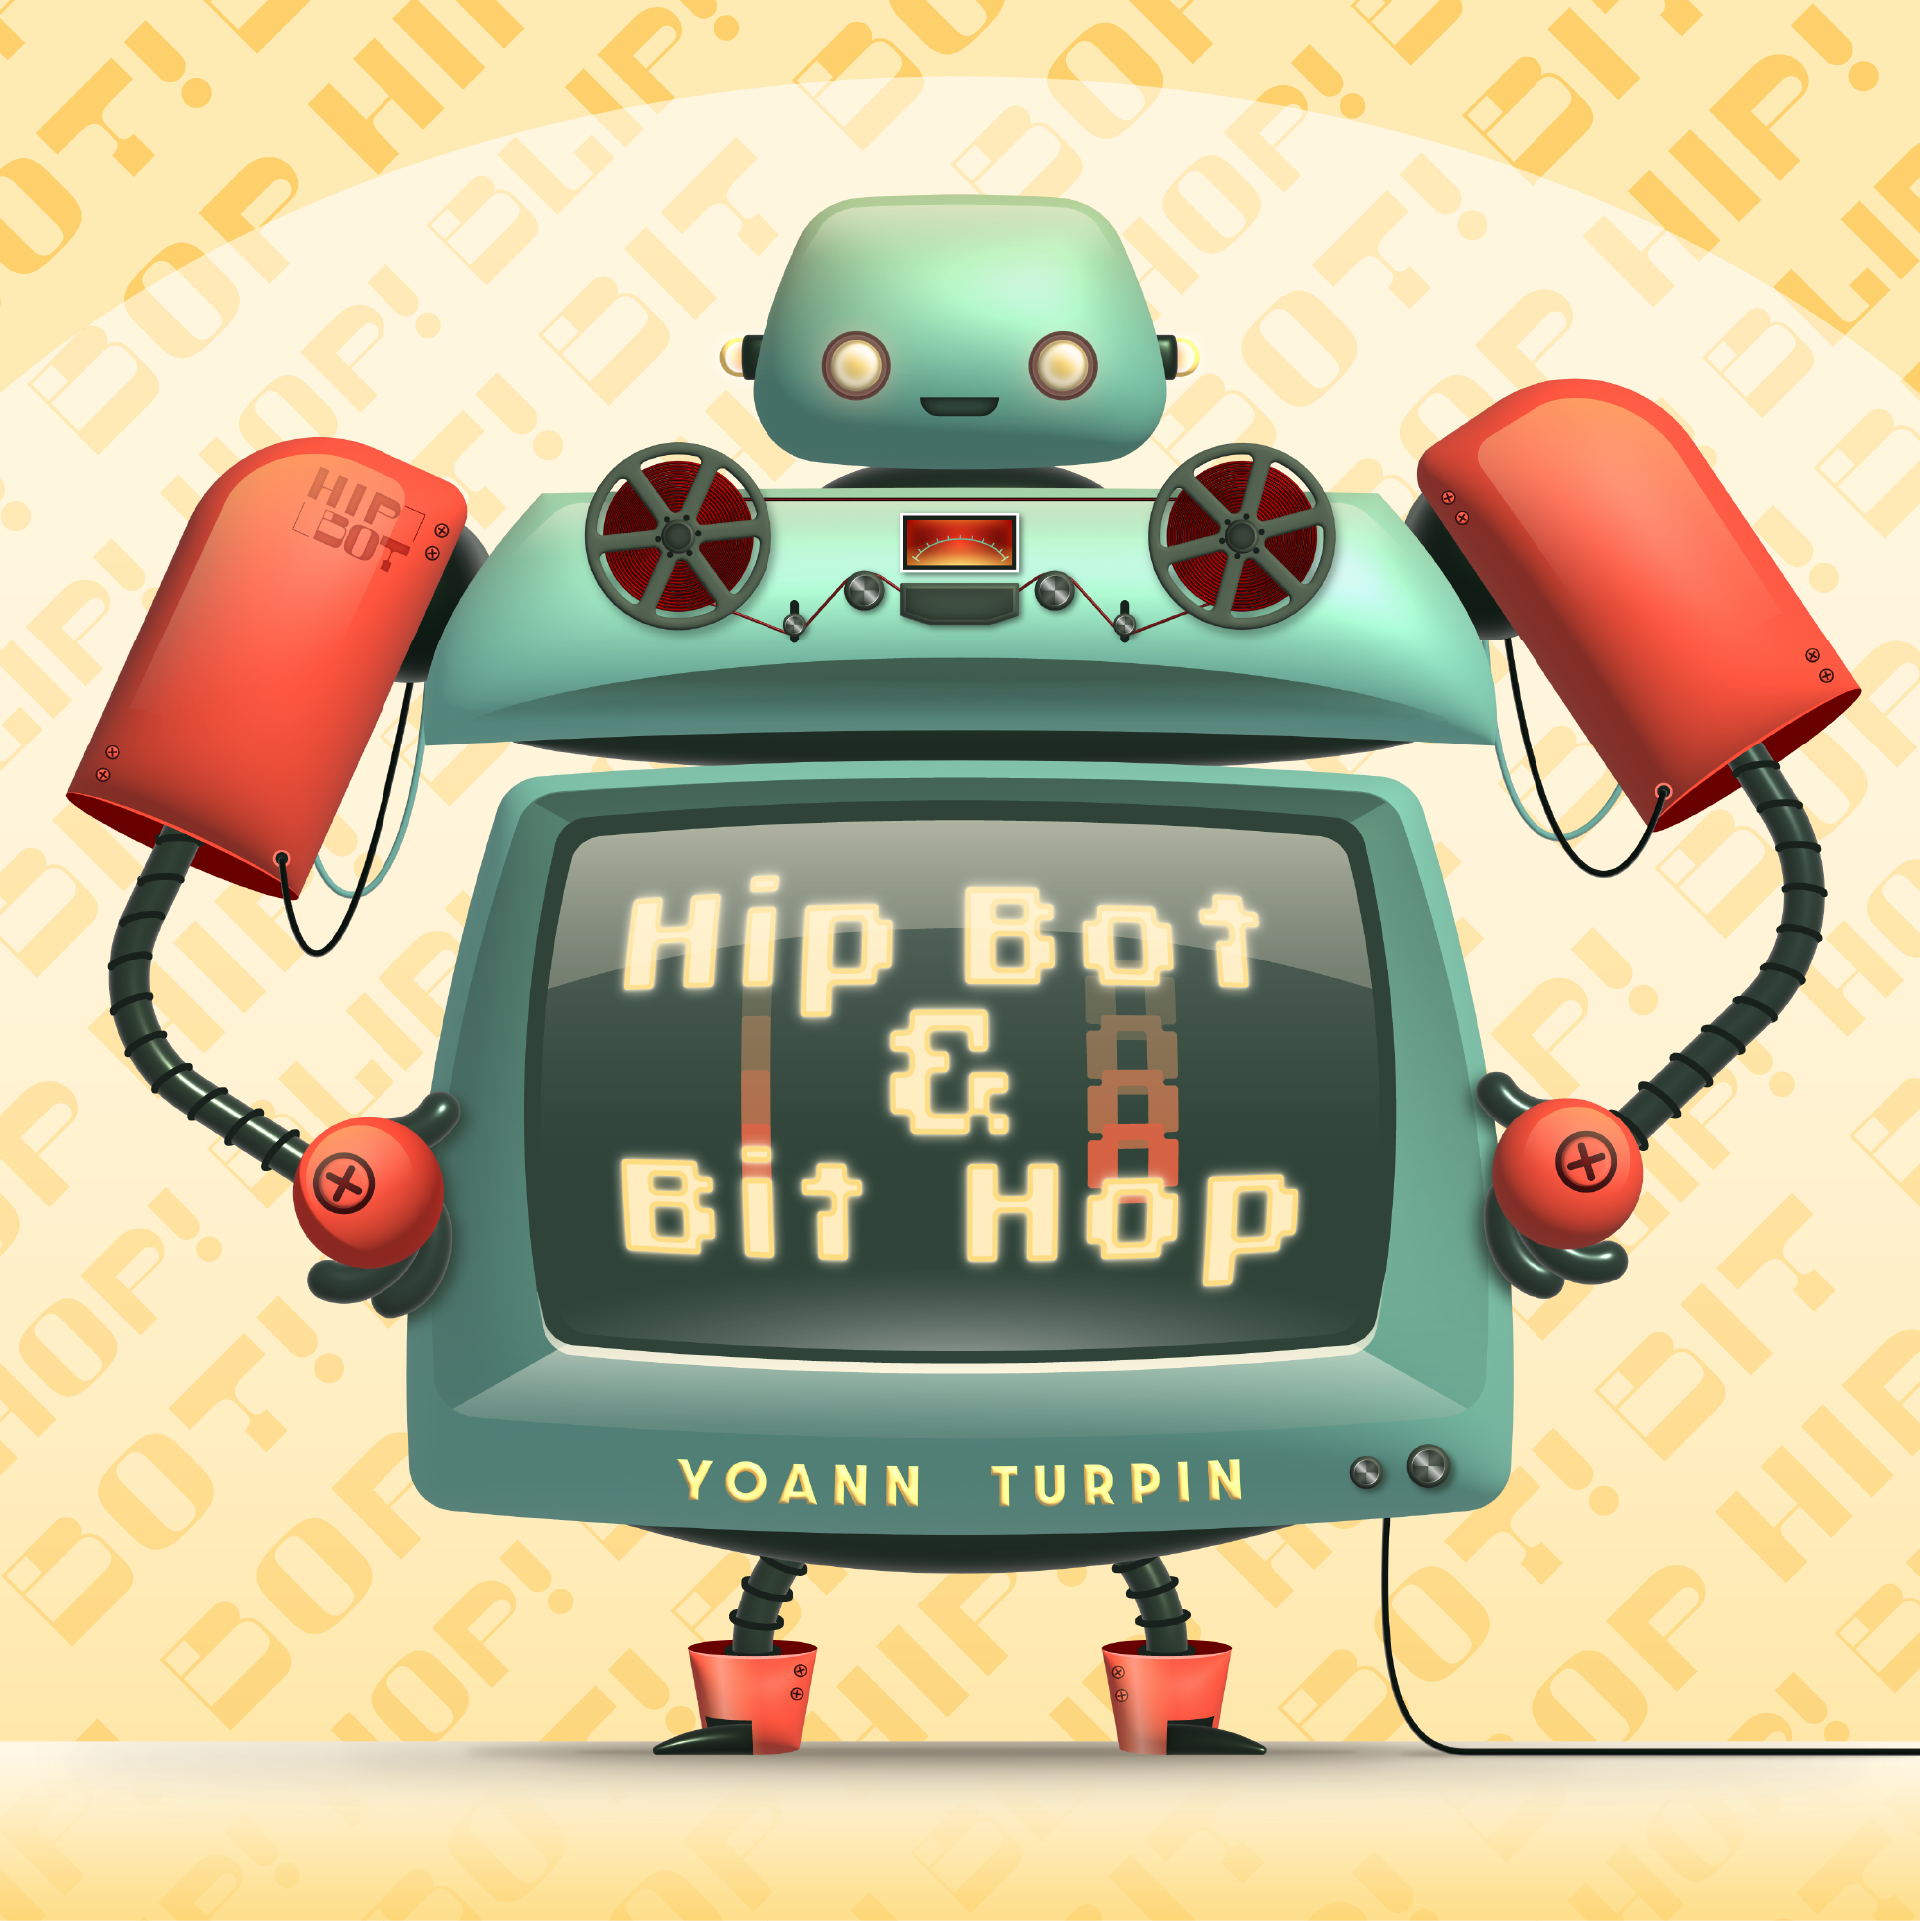 Album art for Hip Bot & Bit Hop by Yoann Turpin, featuring a robot character with a CRT television for an abdomen and a reel-to-reel setup on it's chest.